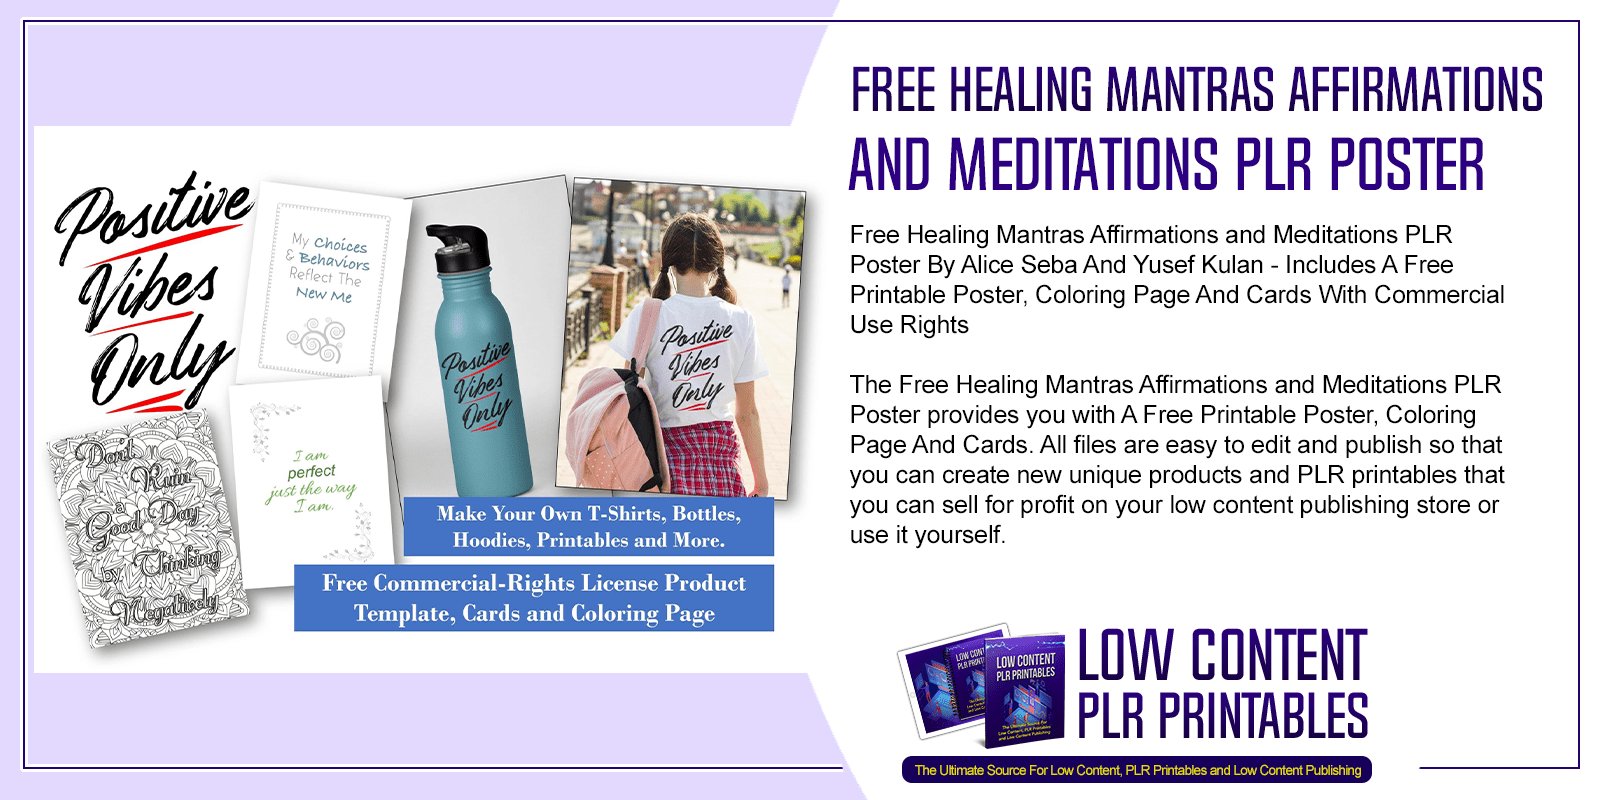 Free Healing Mantras Affirmations and Meditations PLR Poster